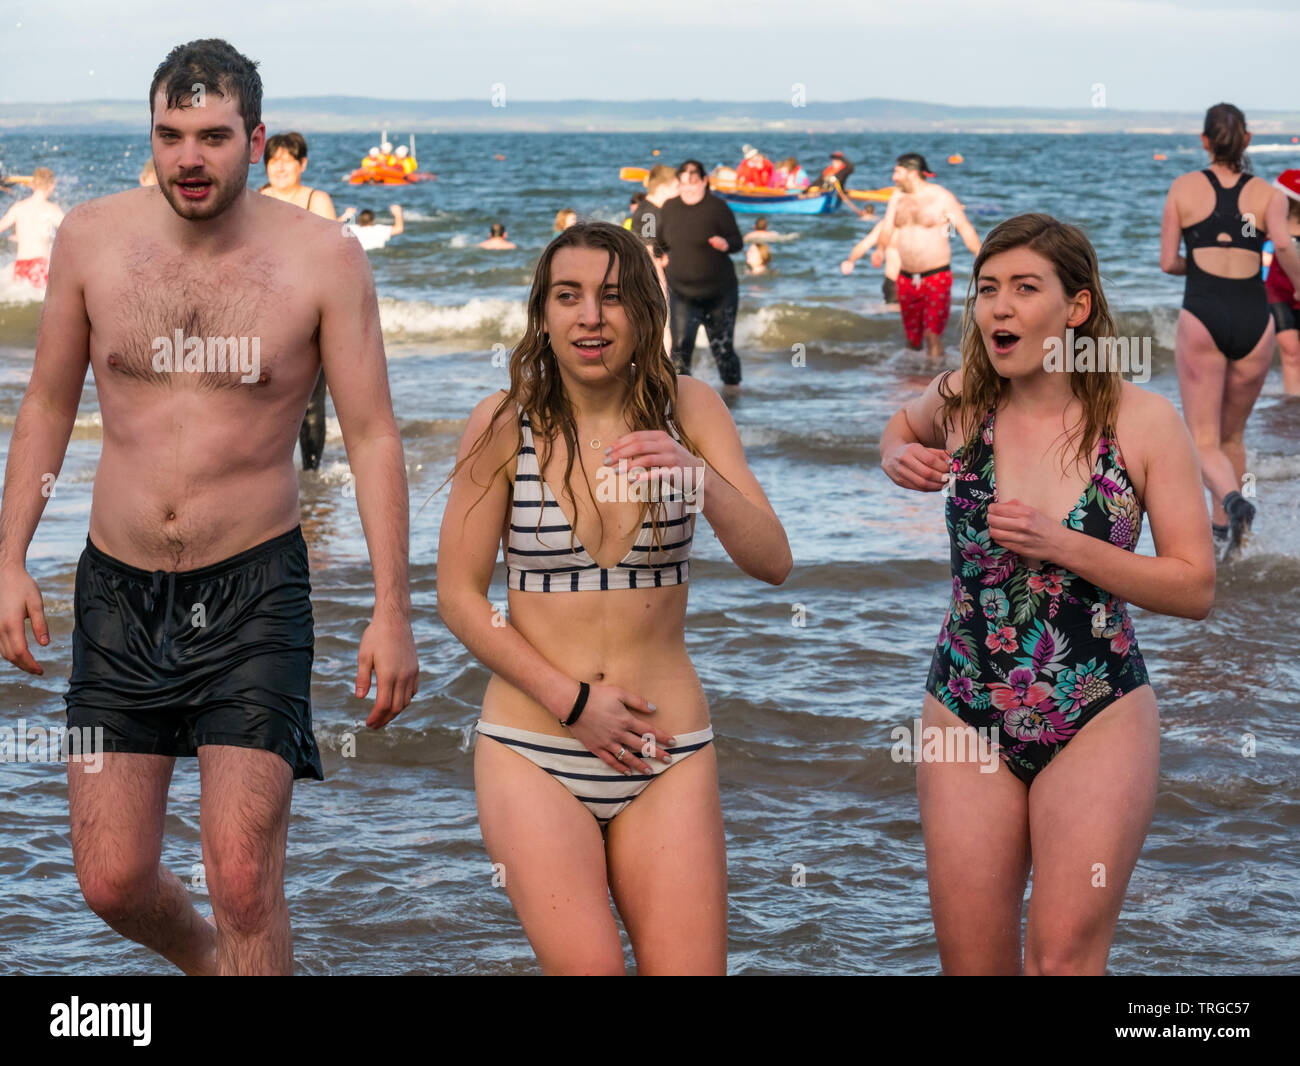 Loony Dook , New Year's Day: People brave cold water, Firth of Forth, North Berwick, East Lothian, Scotland, UK. Young women in swimsuits looking cold Stock Photo